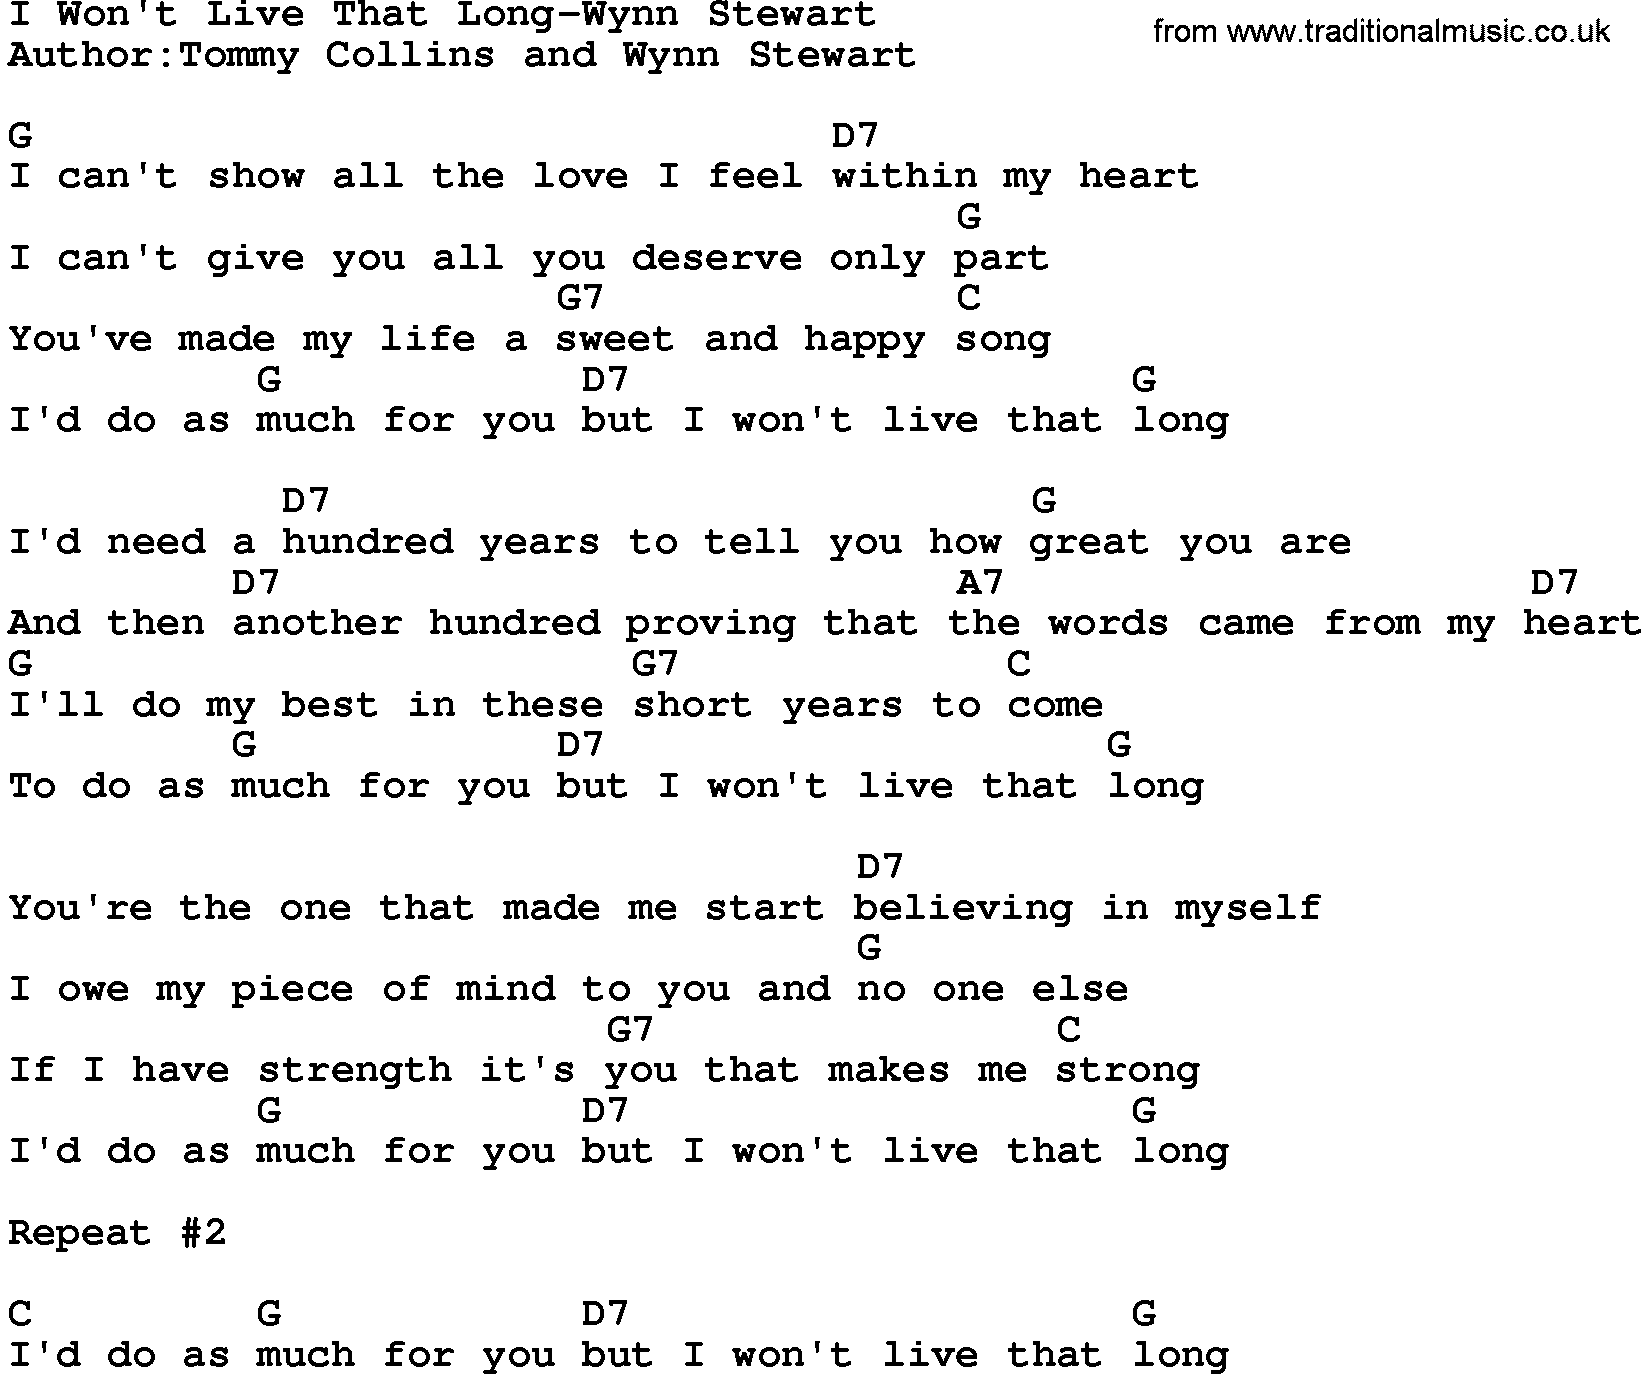 Country music song: I Won't Live That Long-Wynn Stewart lyrics and chords